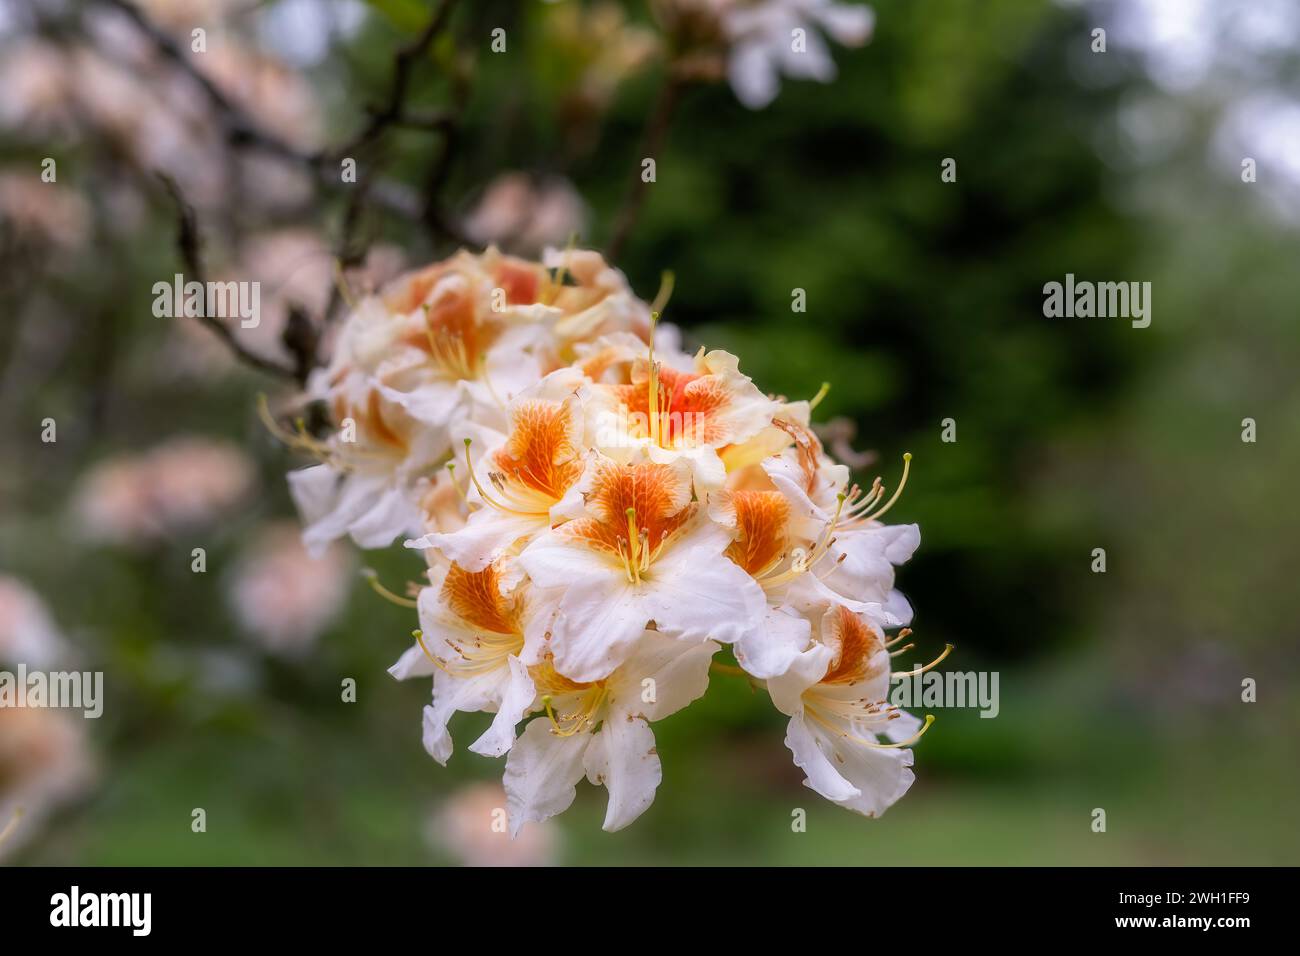 Beautiful cream and orange rhododendron flowers in spring, close up Stock Photo